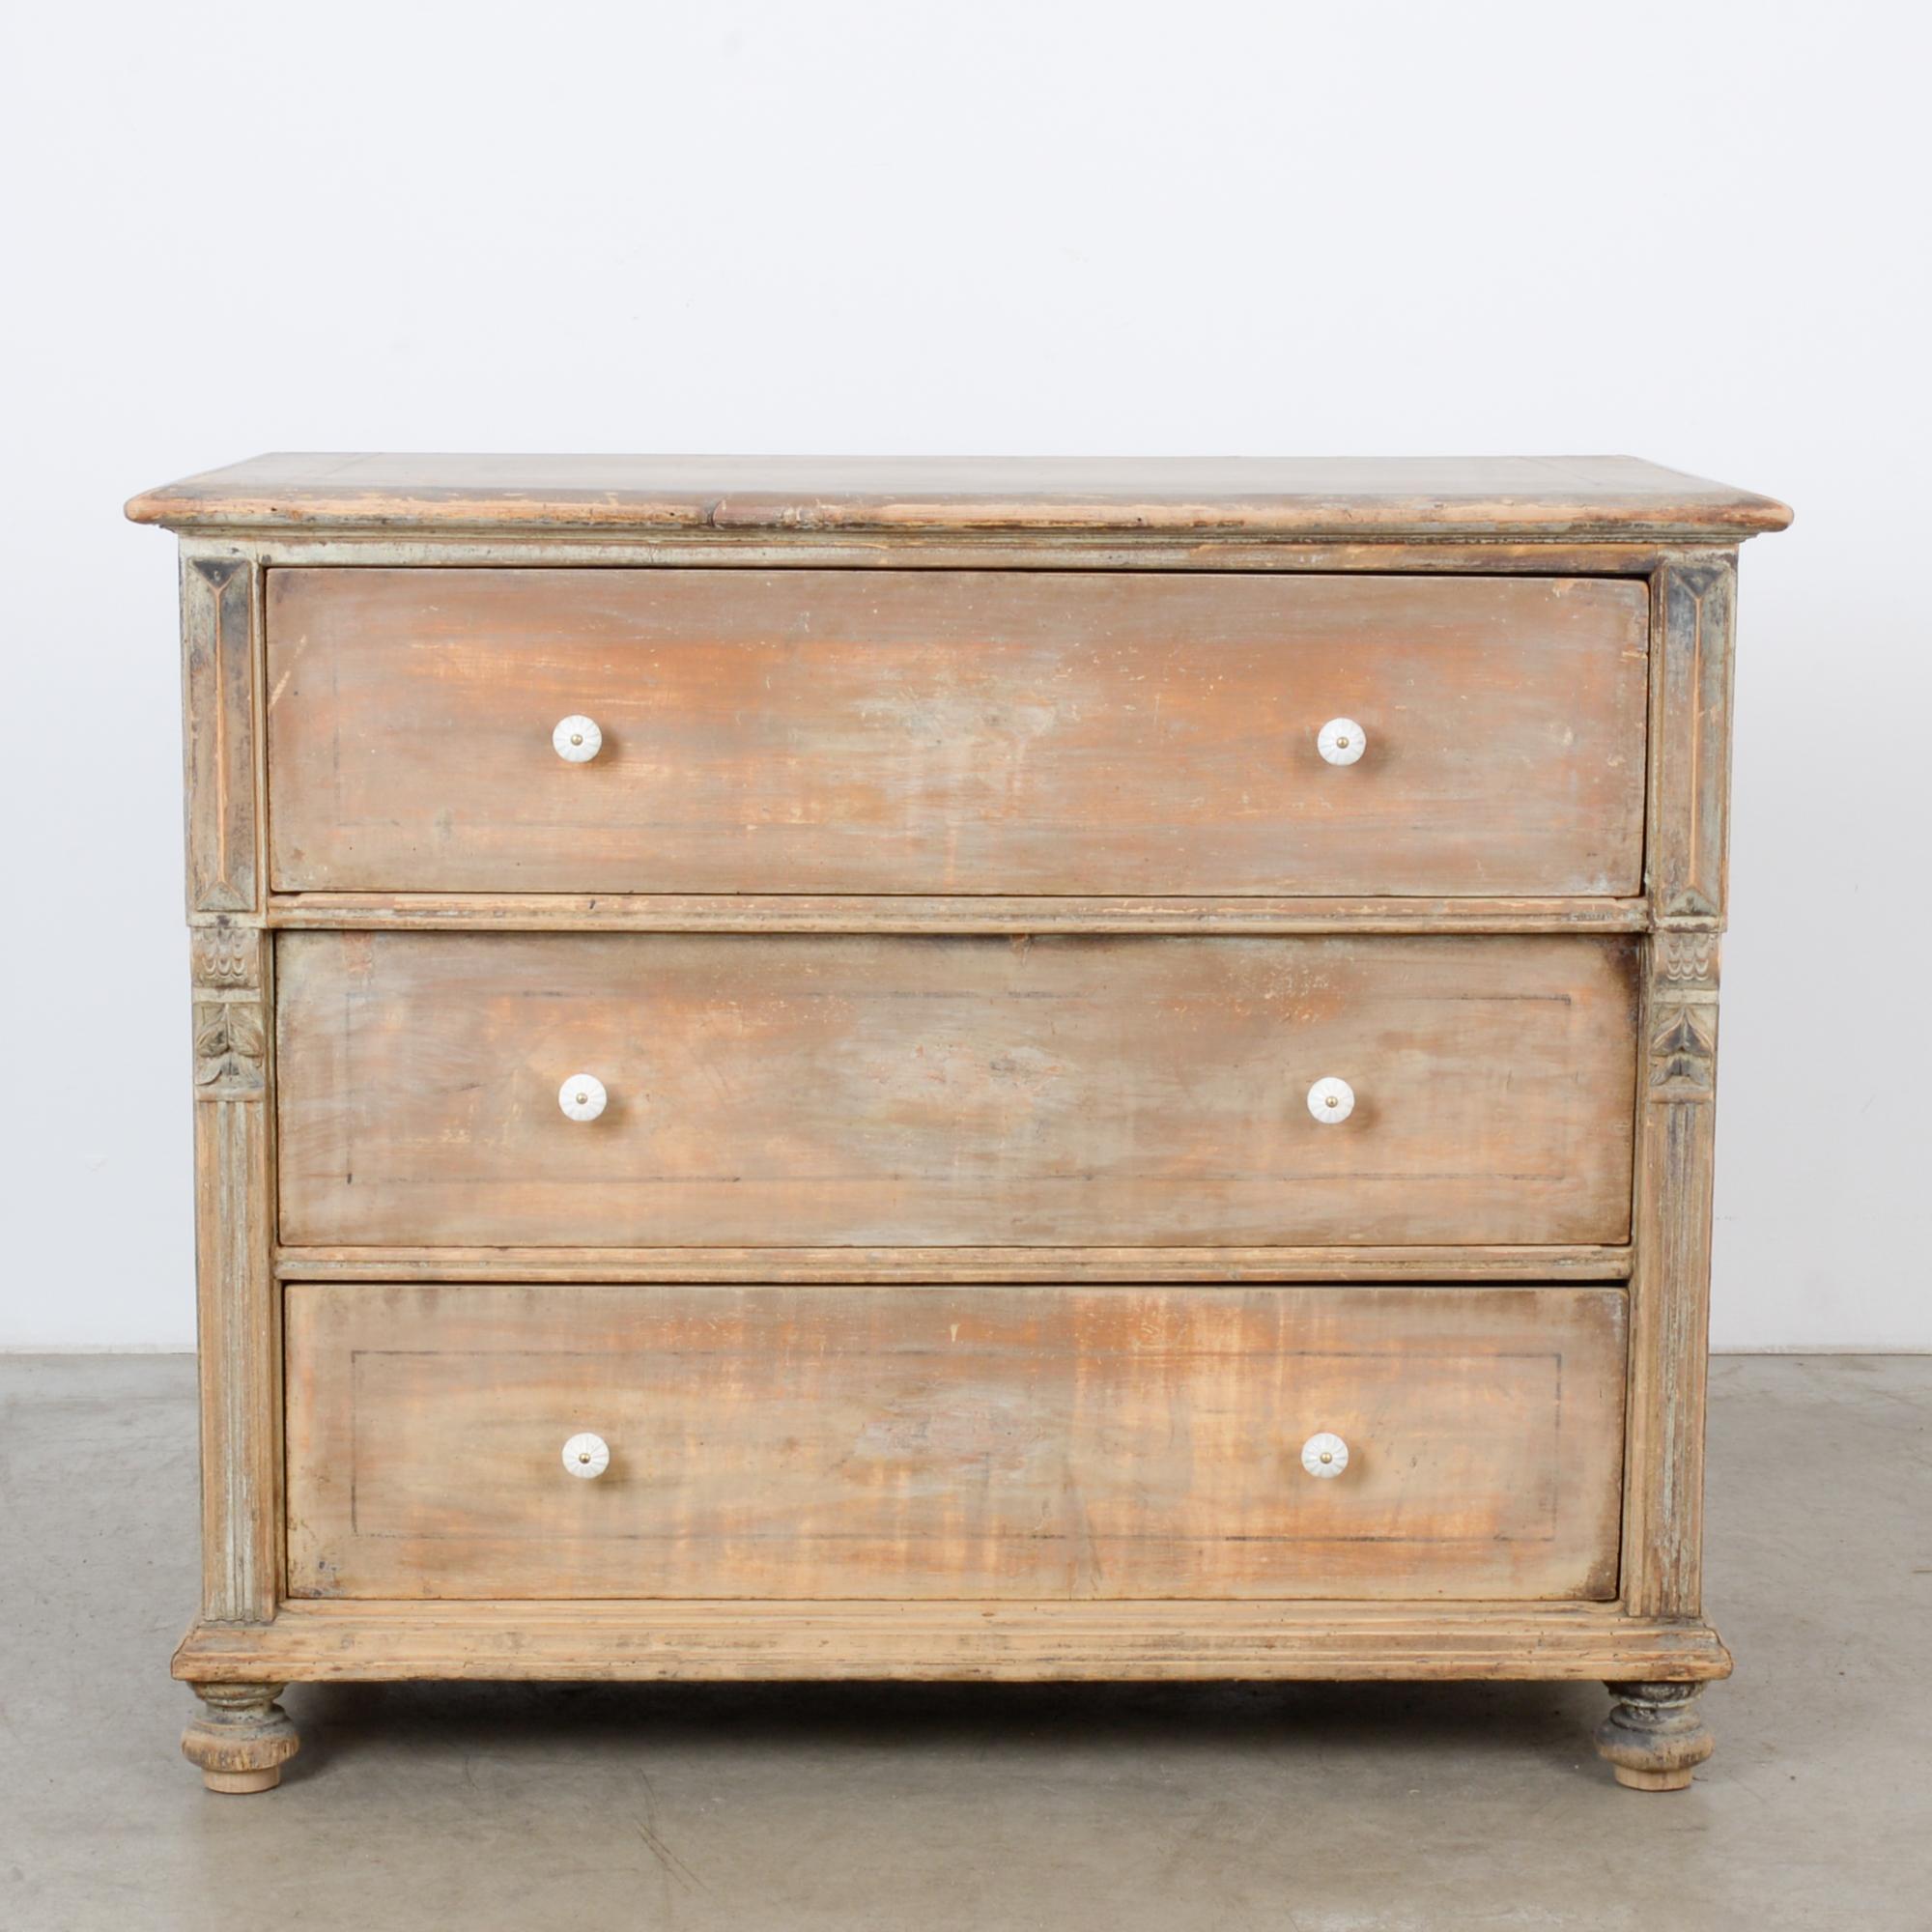 A wooden chest of drawers from Central Europe, circa 1900. The case is square; three ample drawers pull out with white ceramic knobs. The moldings are carved with distinctive designs, inspired by natural history — fluted columns evolve into